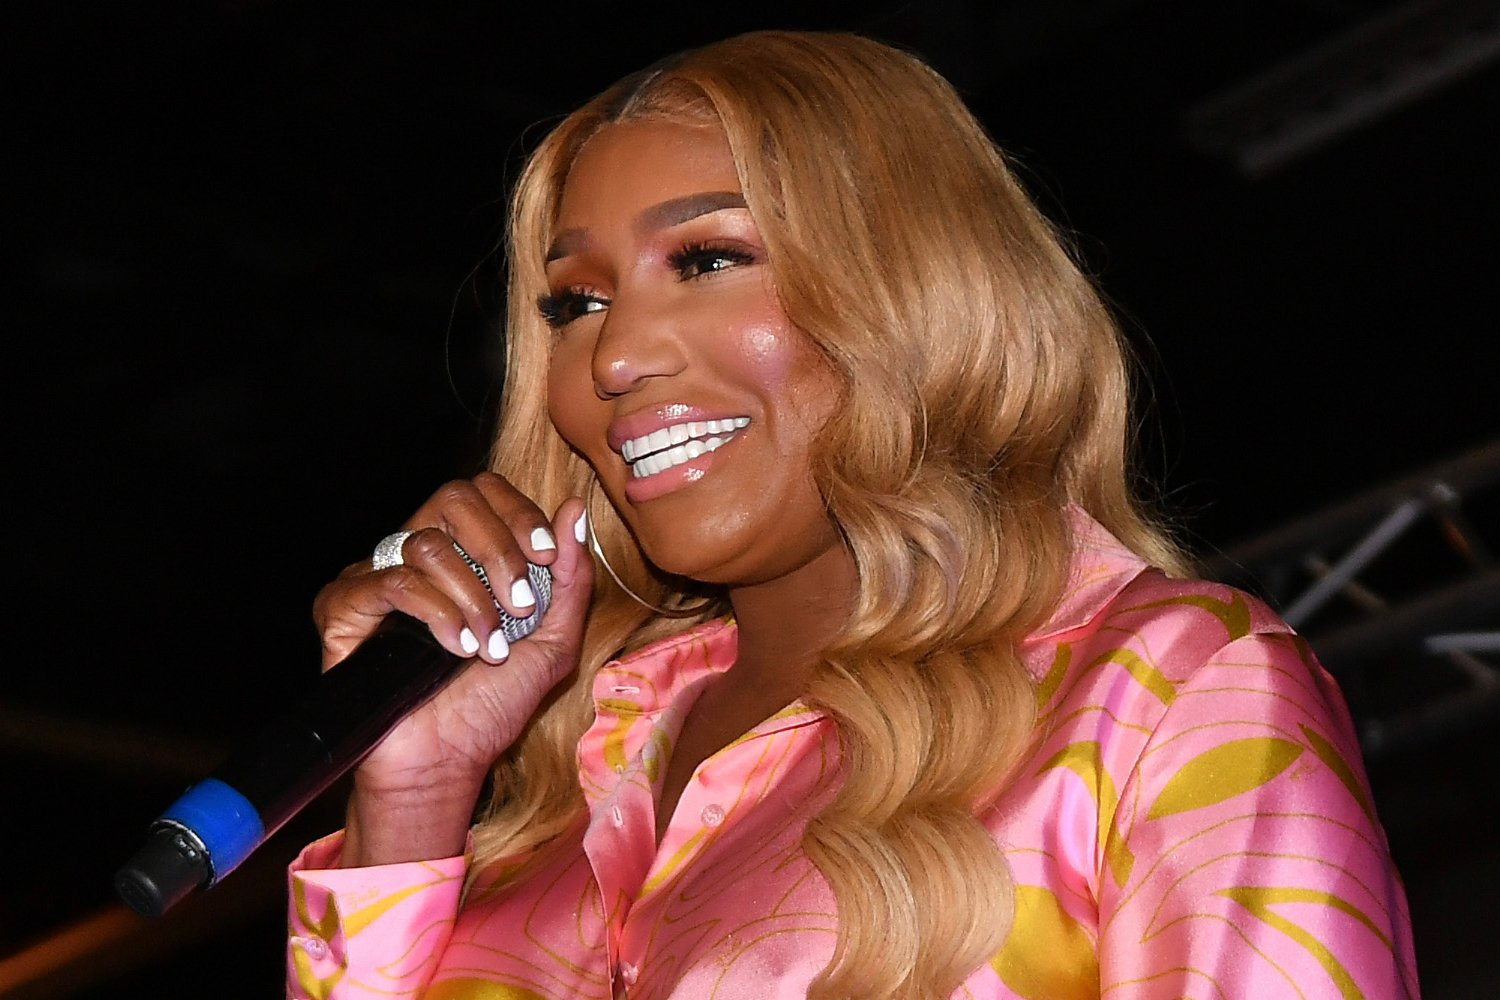 Nene Leakes holding a microphone and smiling